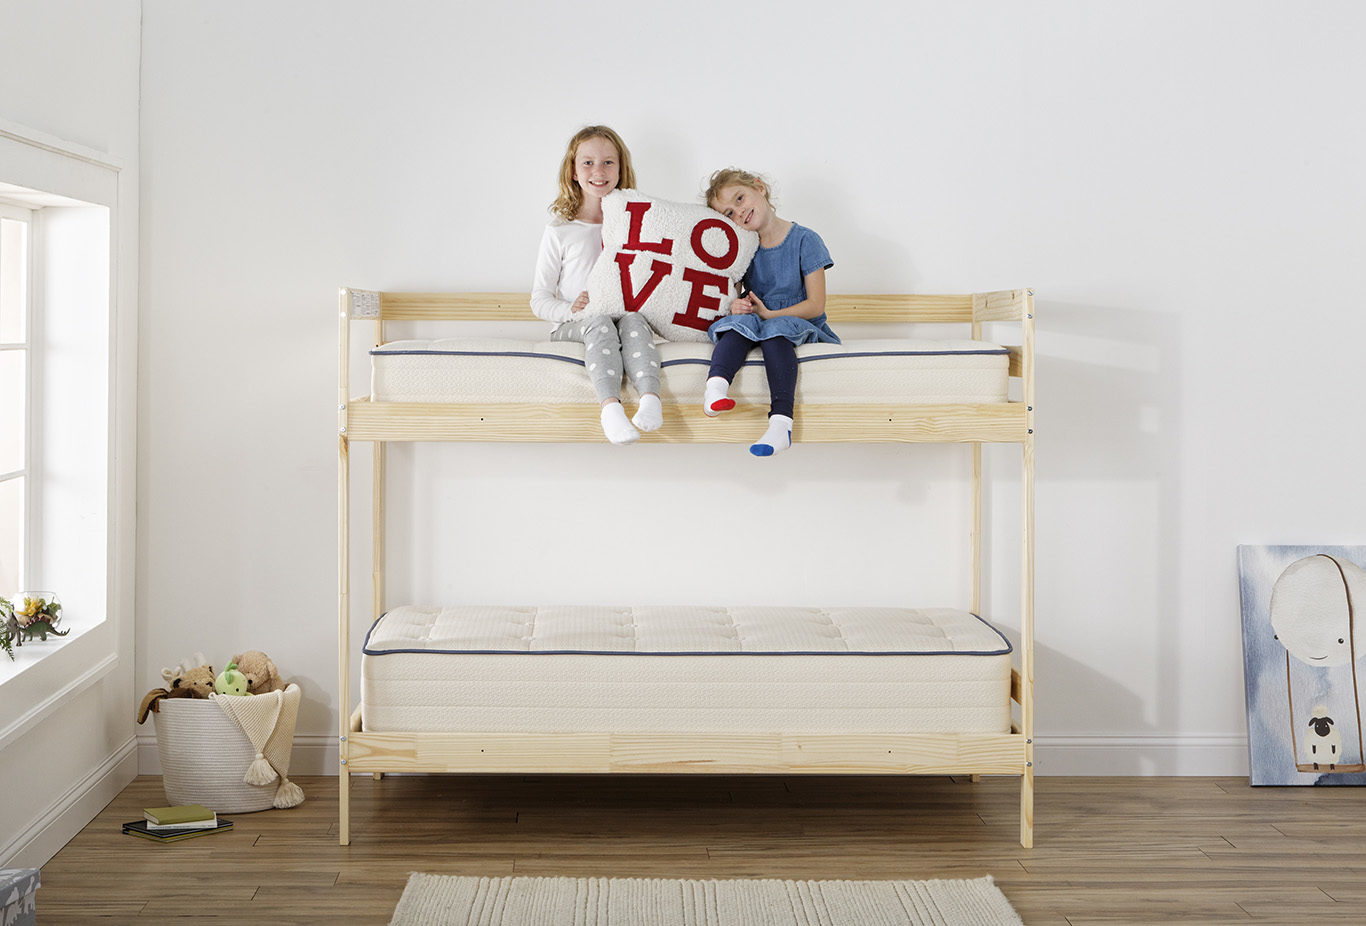 Kiwi Bunk Bed Mattresses, Bunk Beds Sold With Mattresses